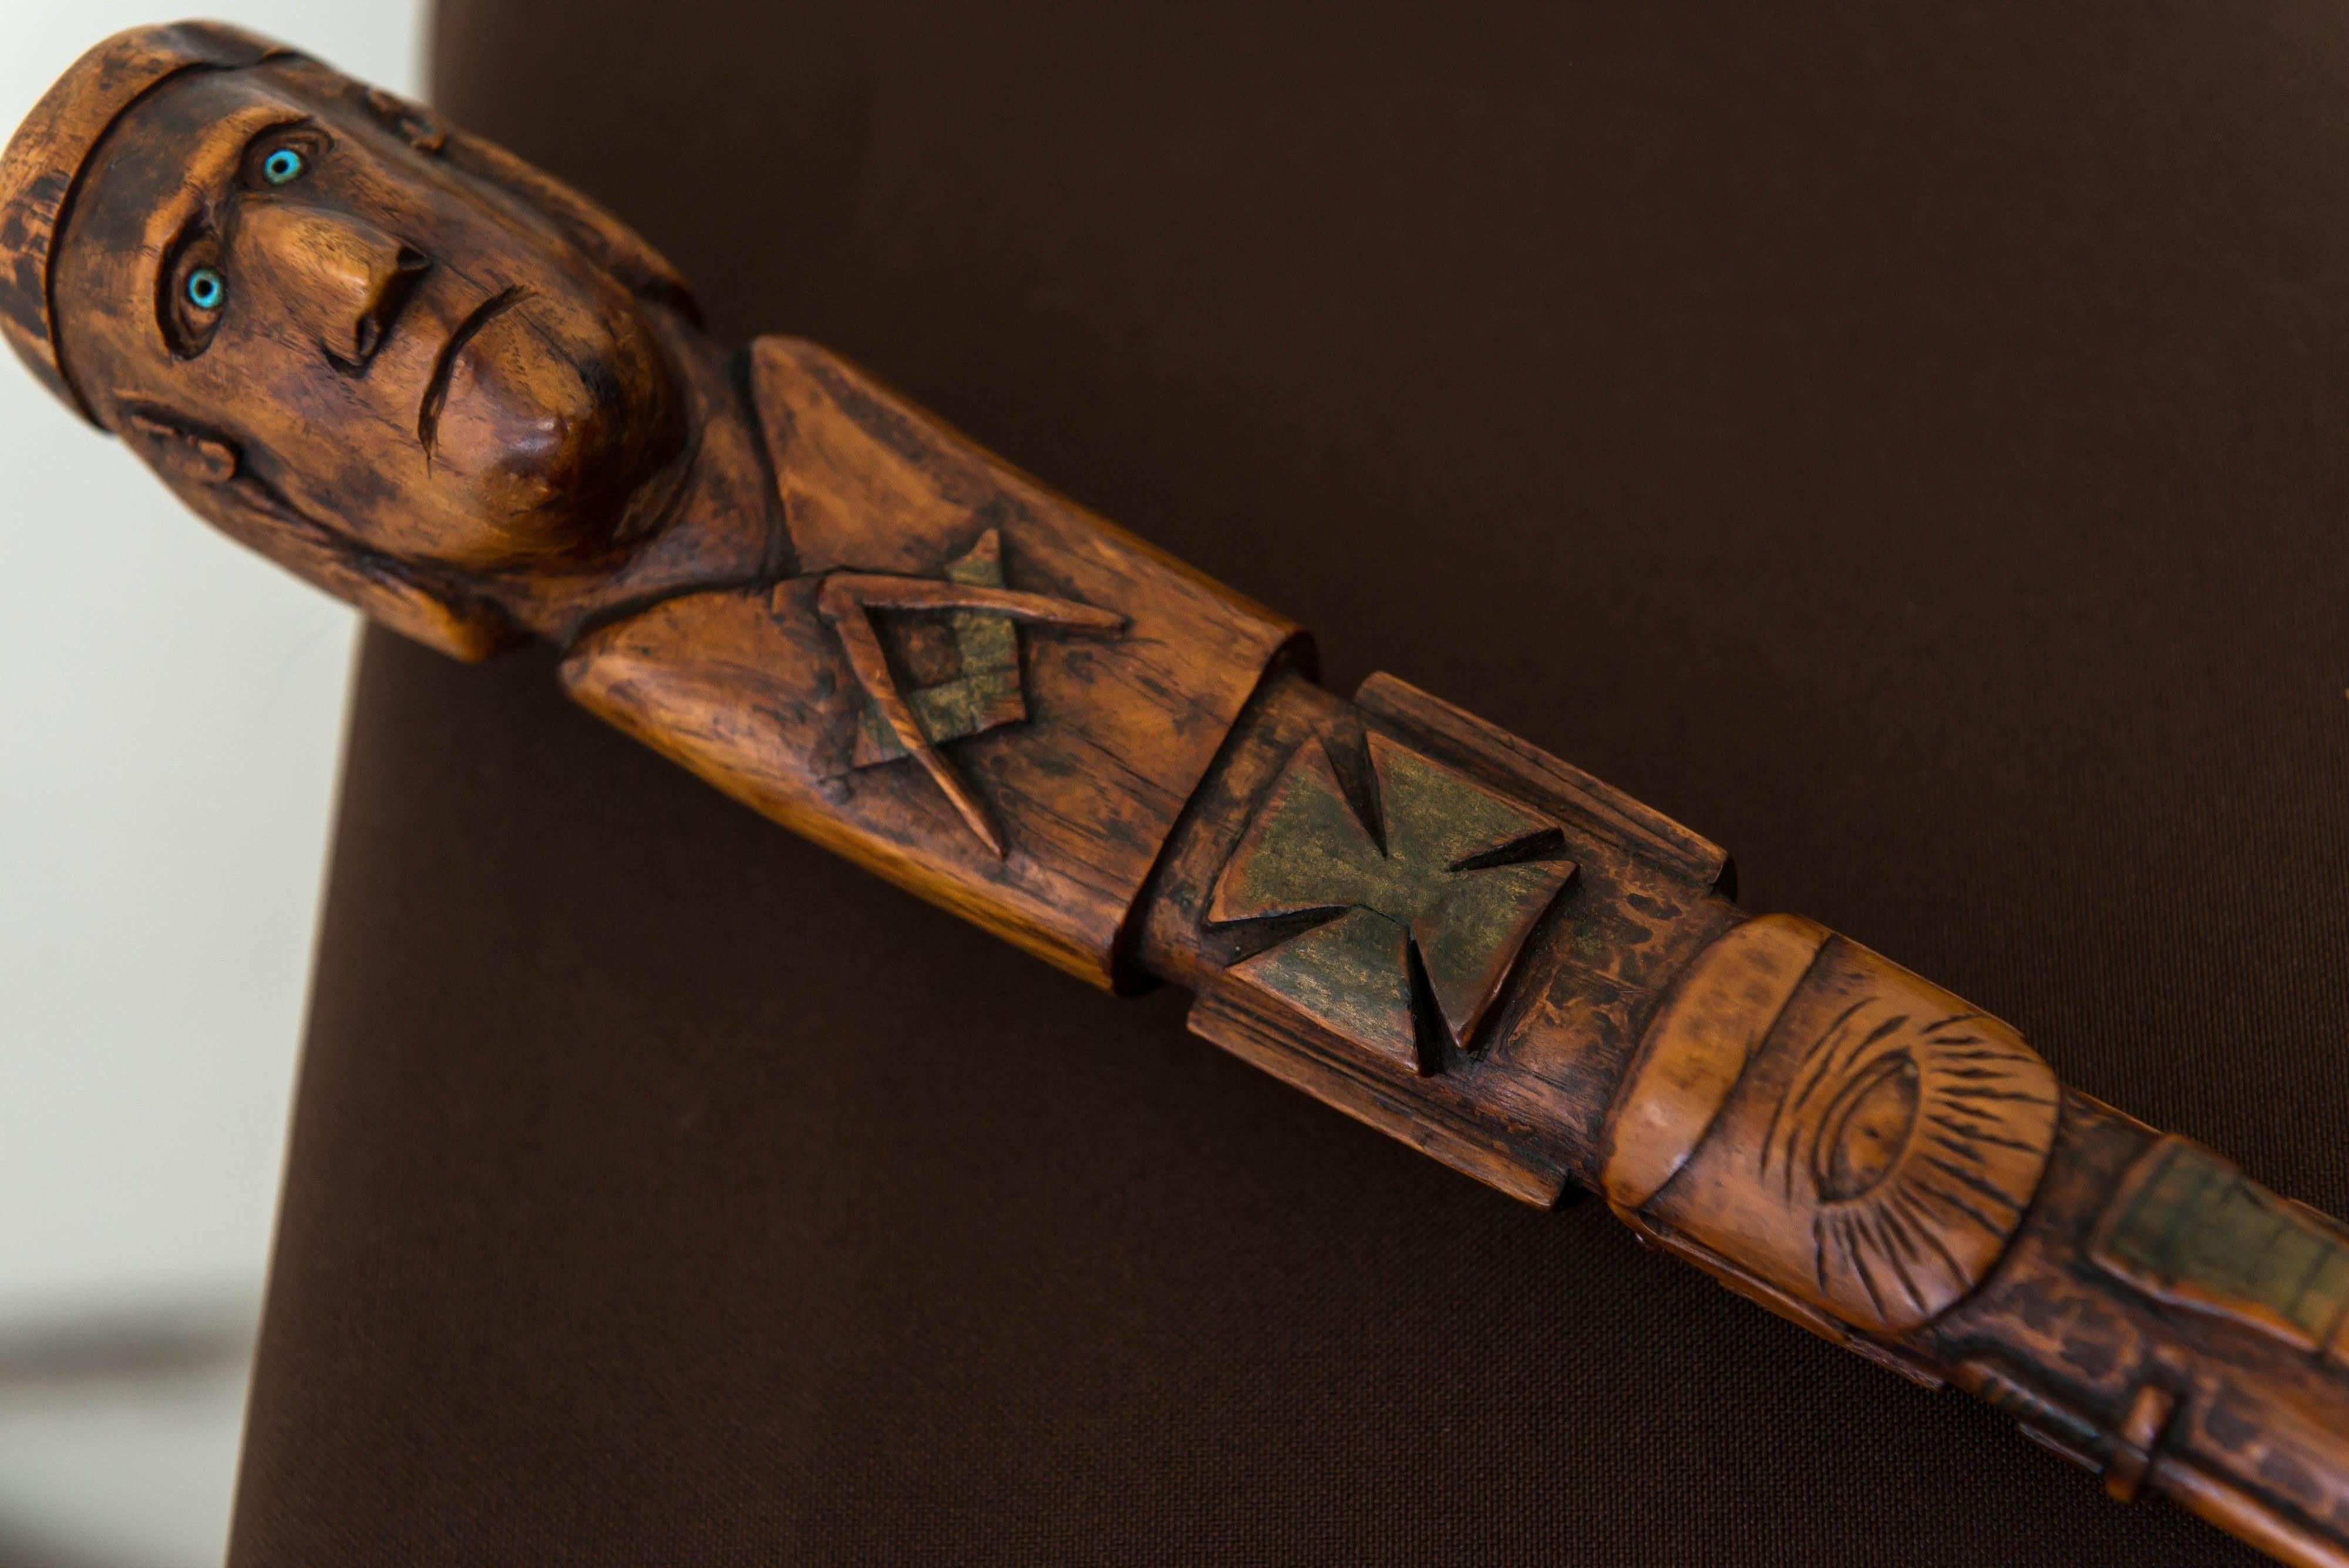 A late 19th century American Folk Art Masonic cane or stick, circa 1890.
Elaborate relief carved and polychrome Masonic icons cover all surfaces of the cane. The handle / top with a carved head of a fierce man with an intense gaze fitted with